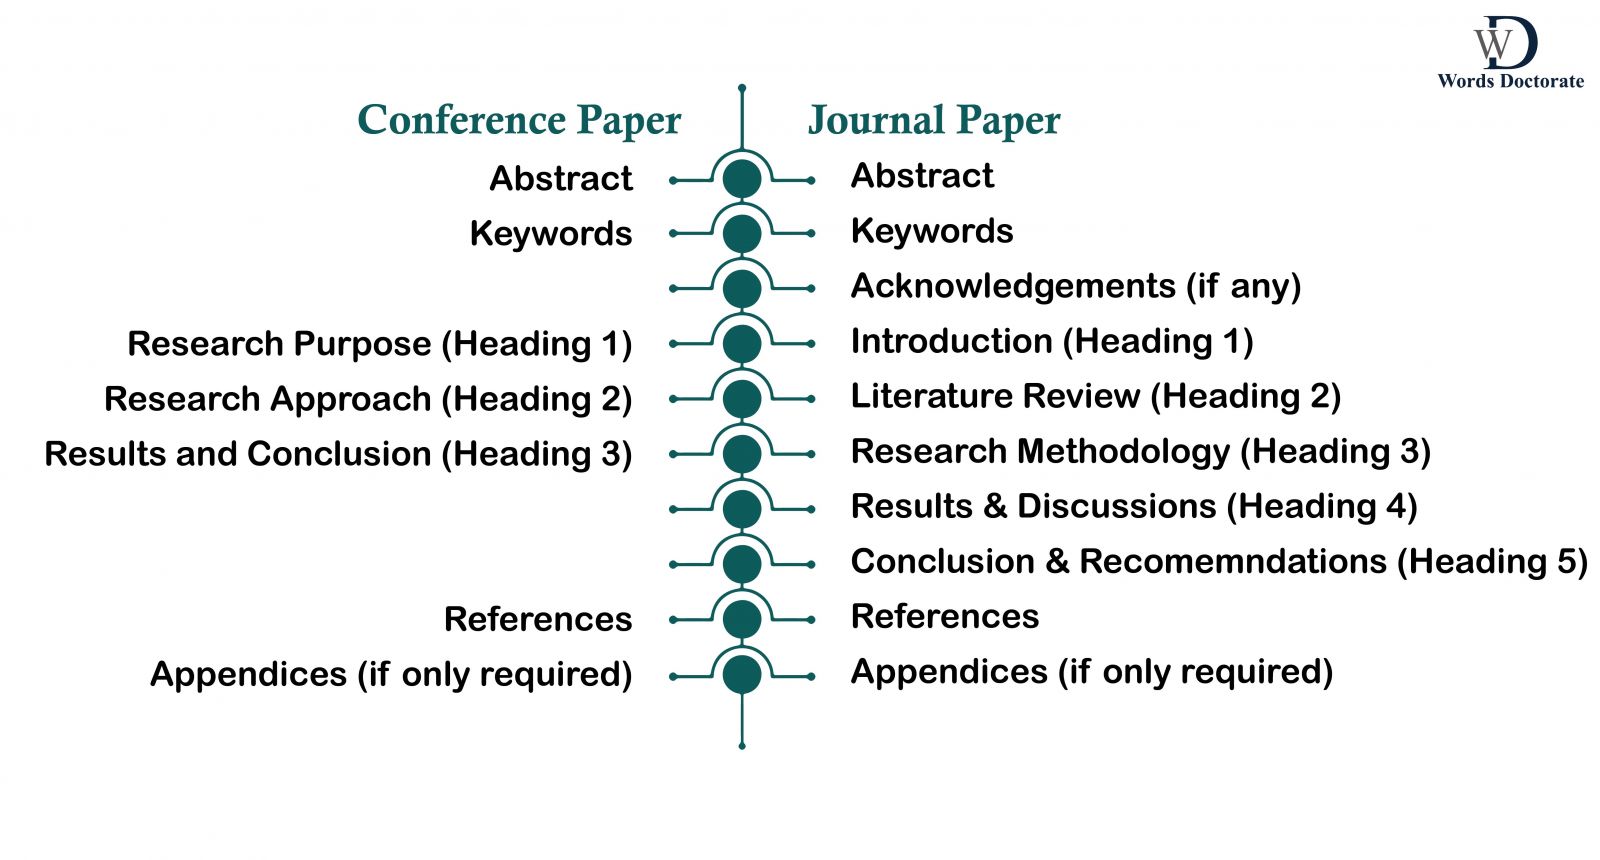 research paper vs conference paper